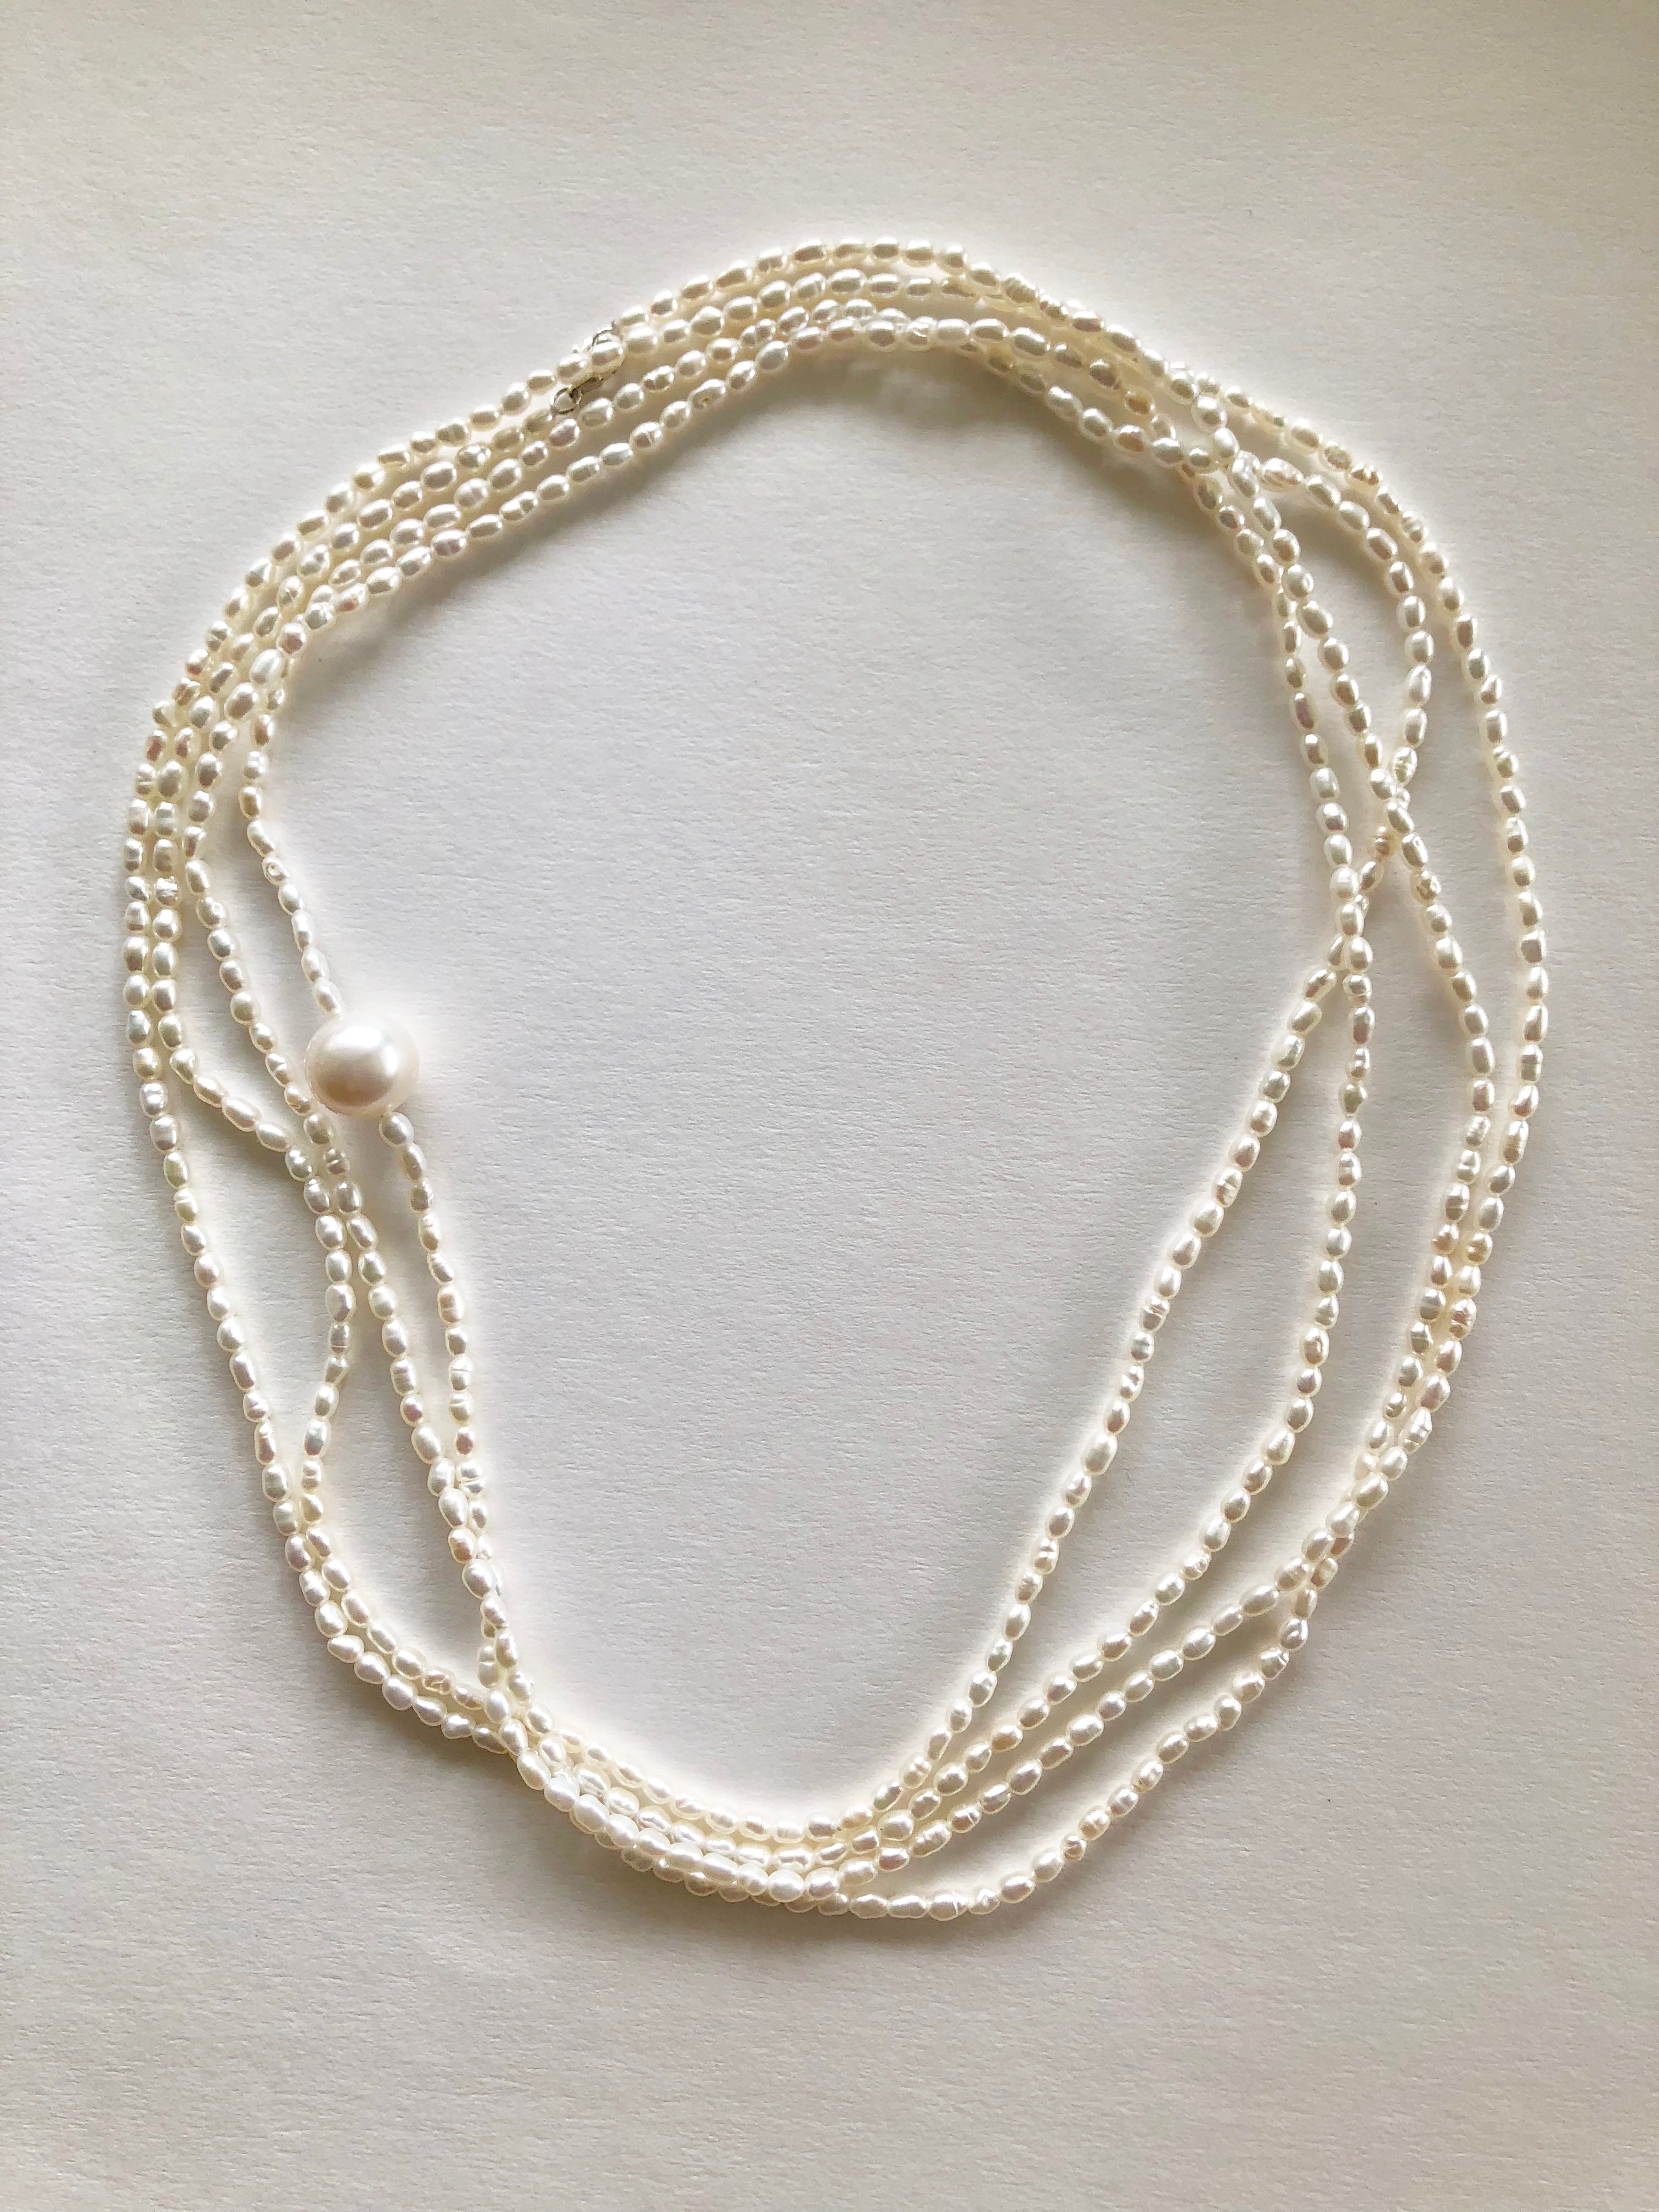 BODY WRAP SEED PEARL NECKLACE